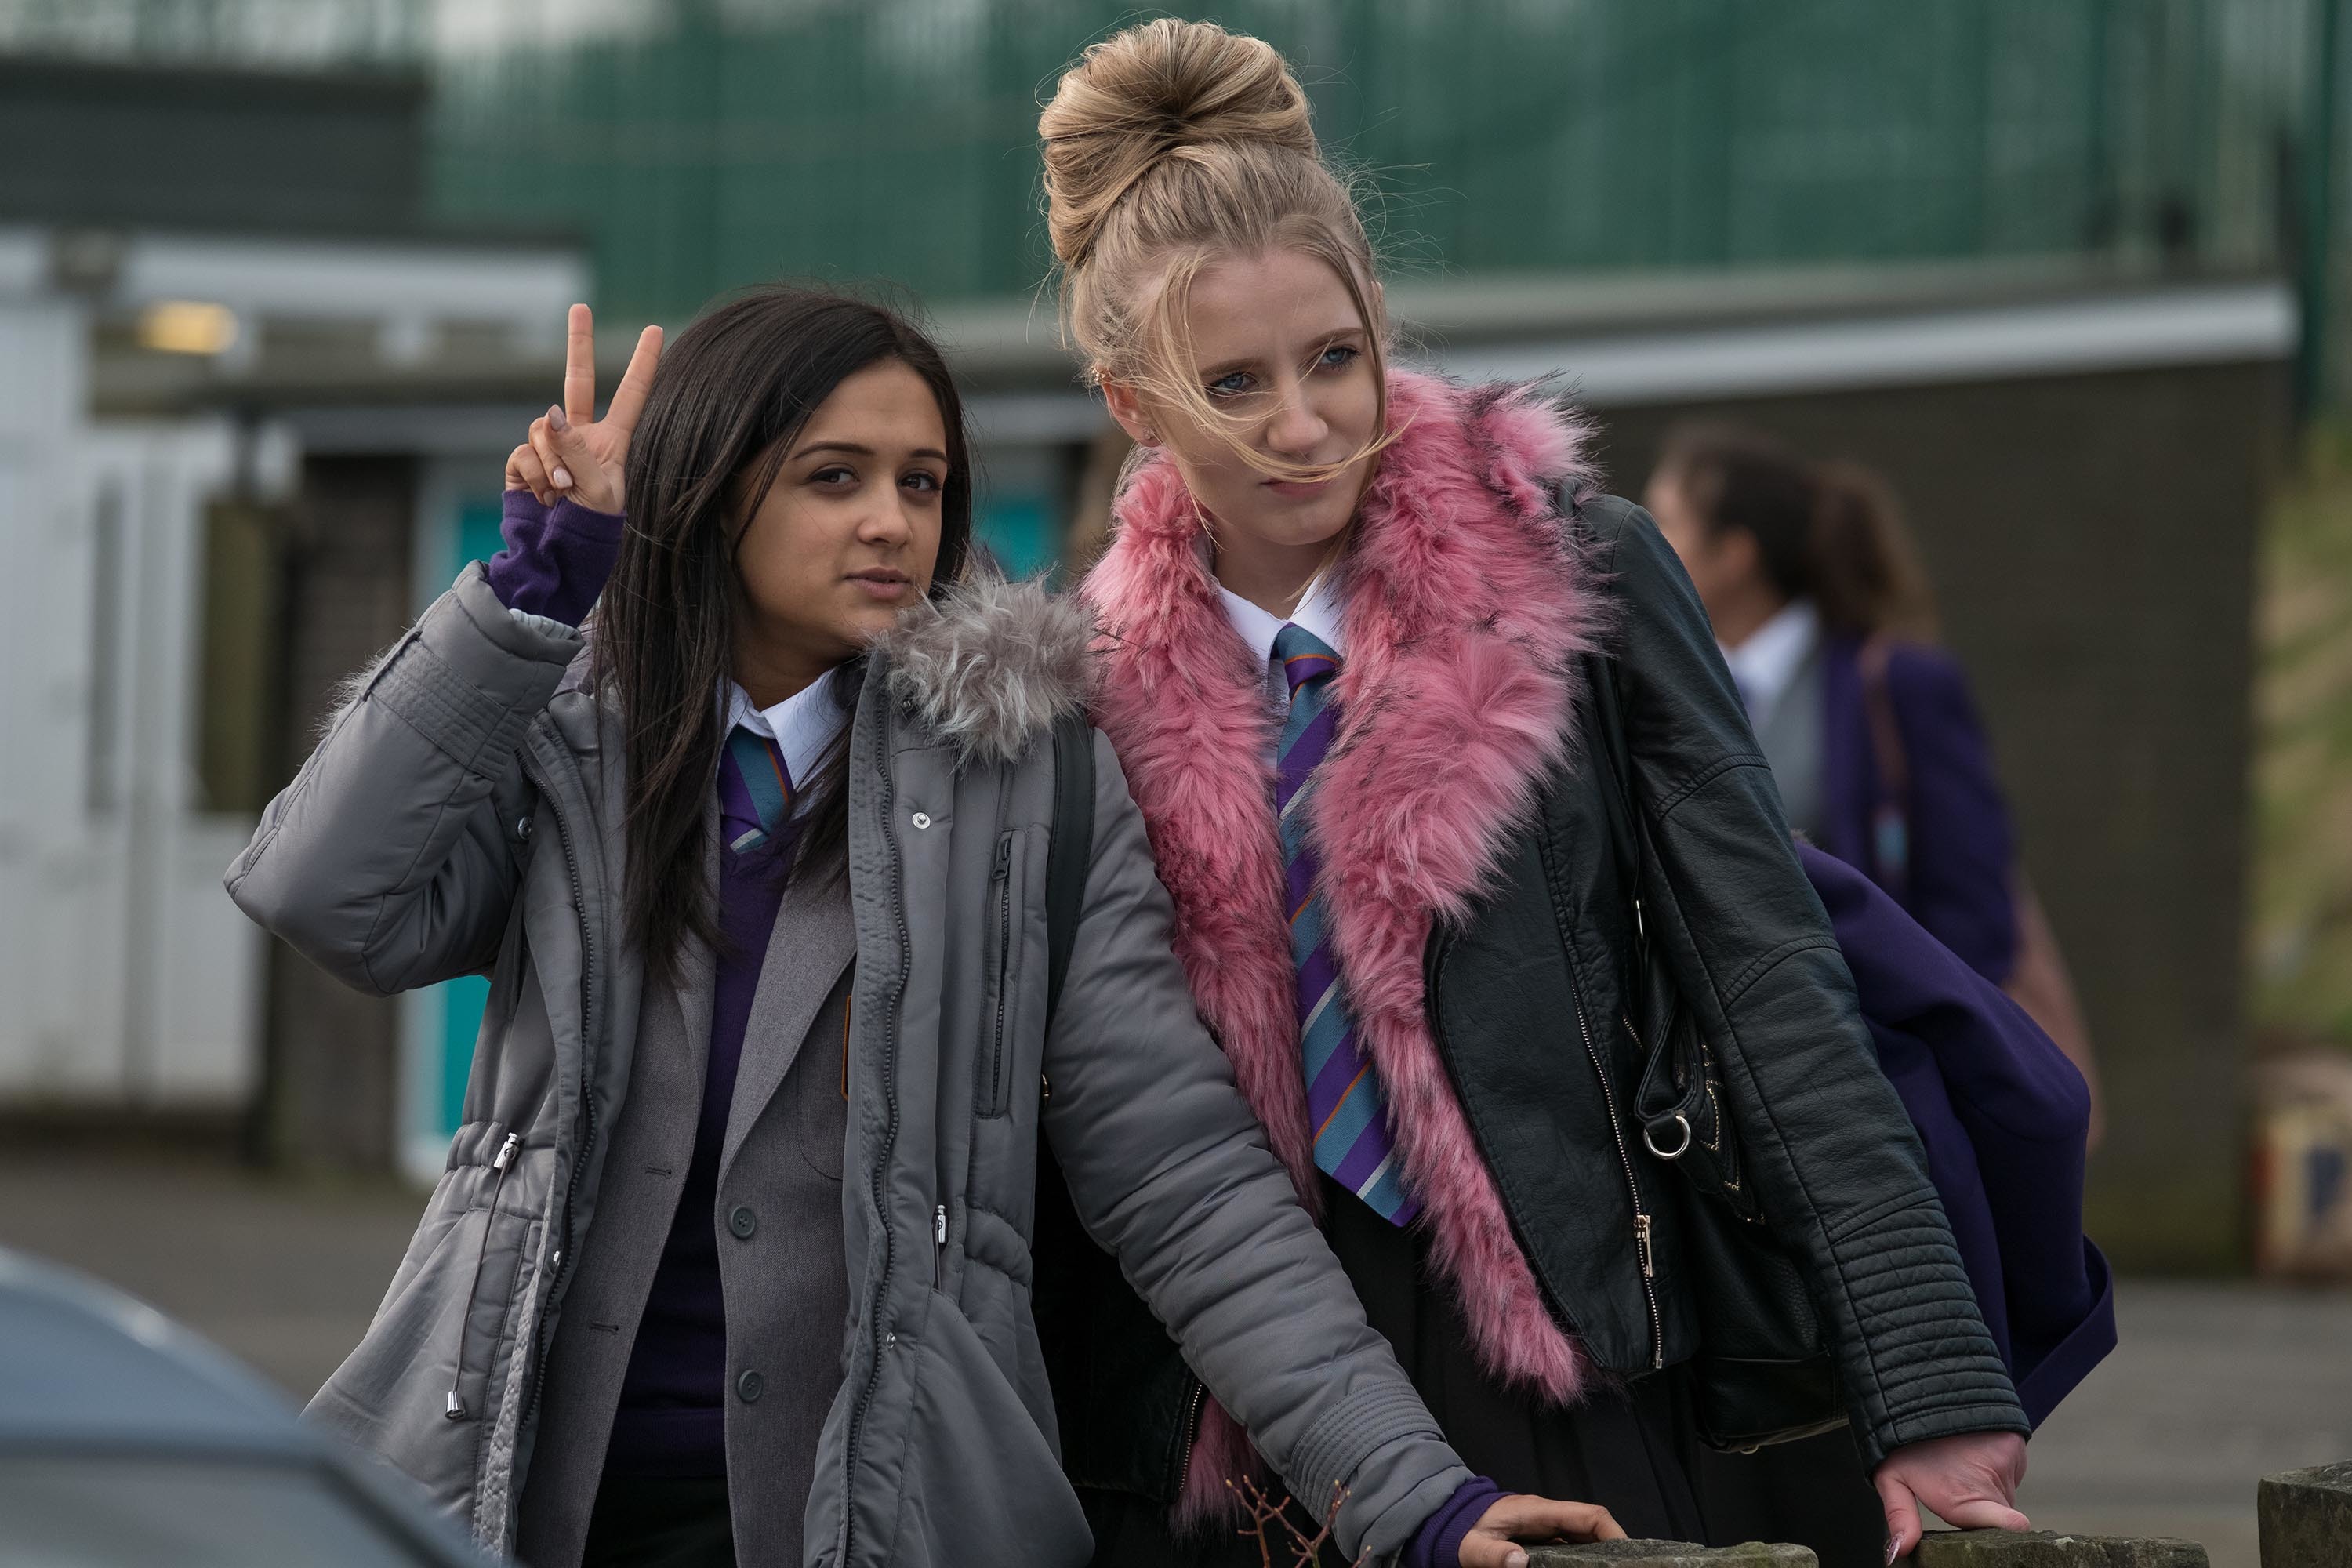 Amy Leigh Hickman as Nasreen Paracha and Poppy Lee Friar as Missy Booth in Ackley Bridge.